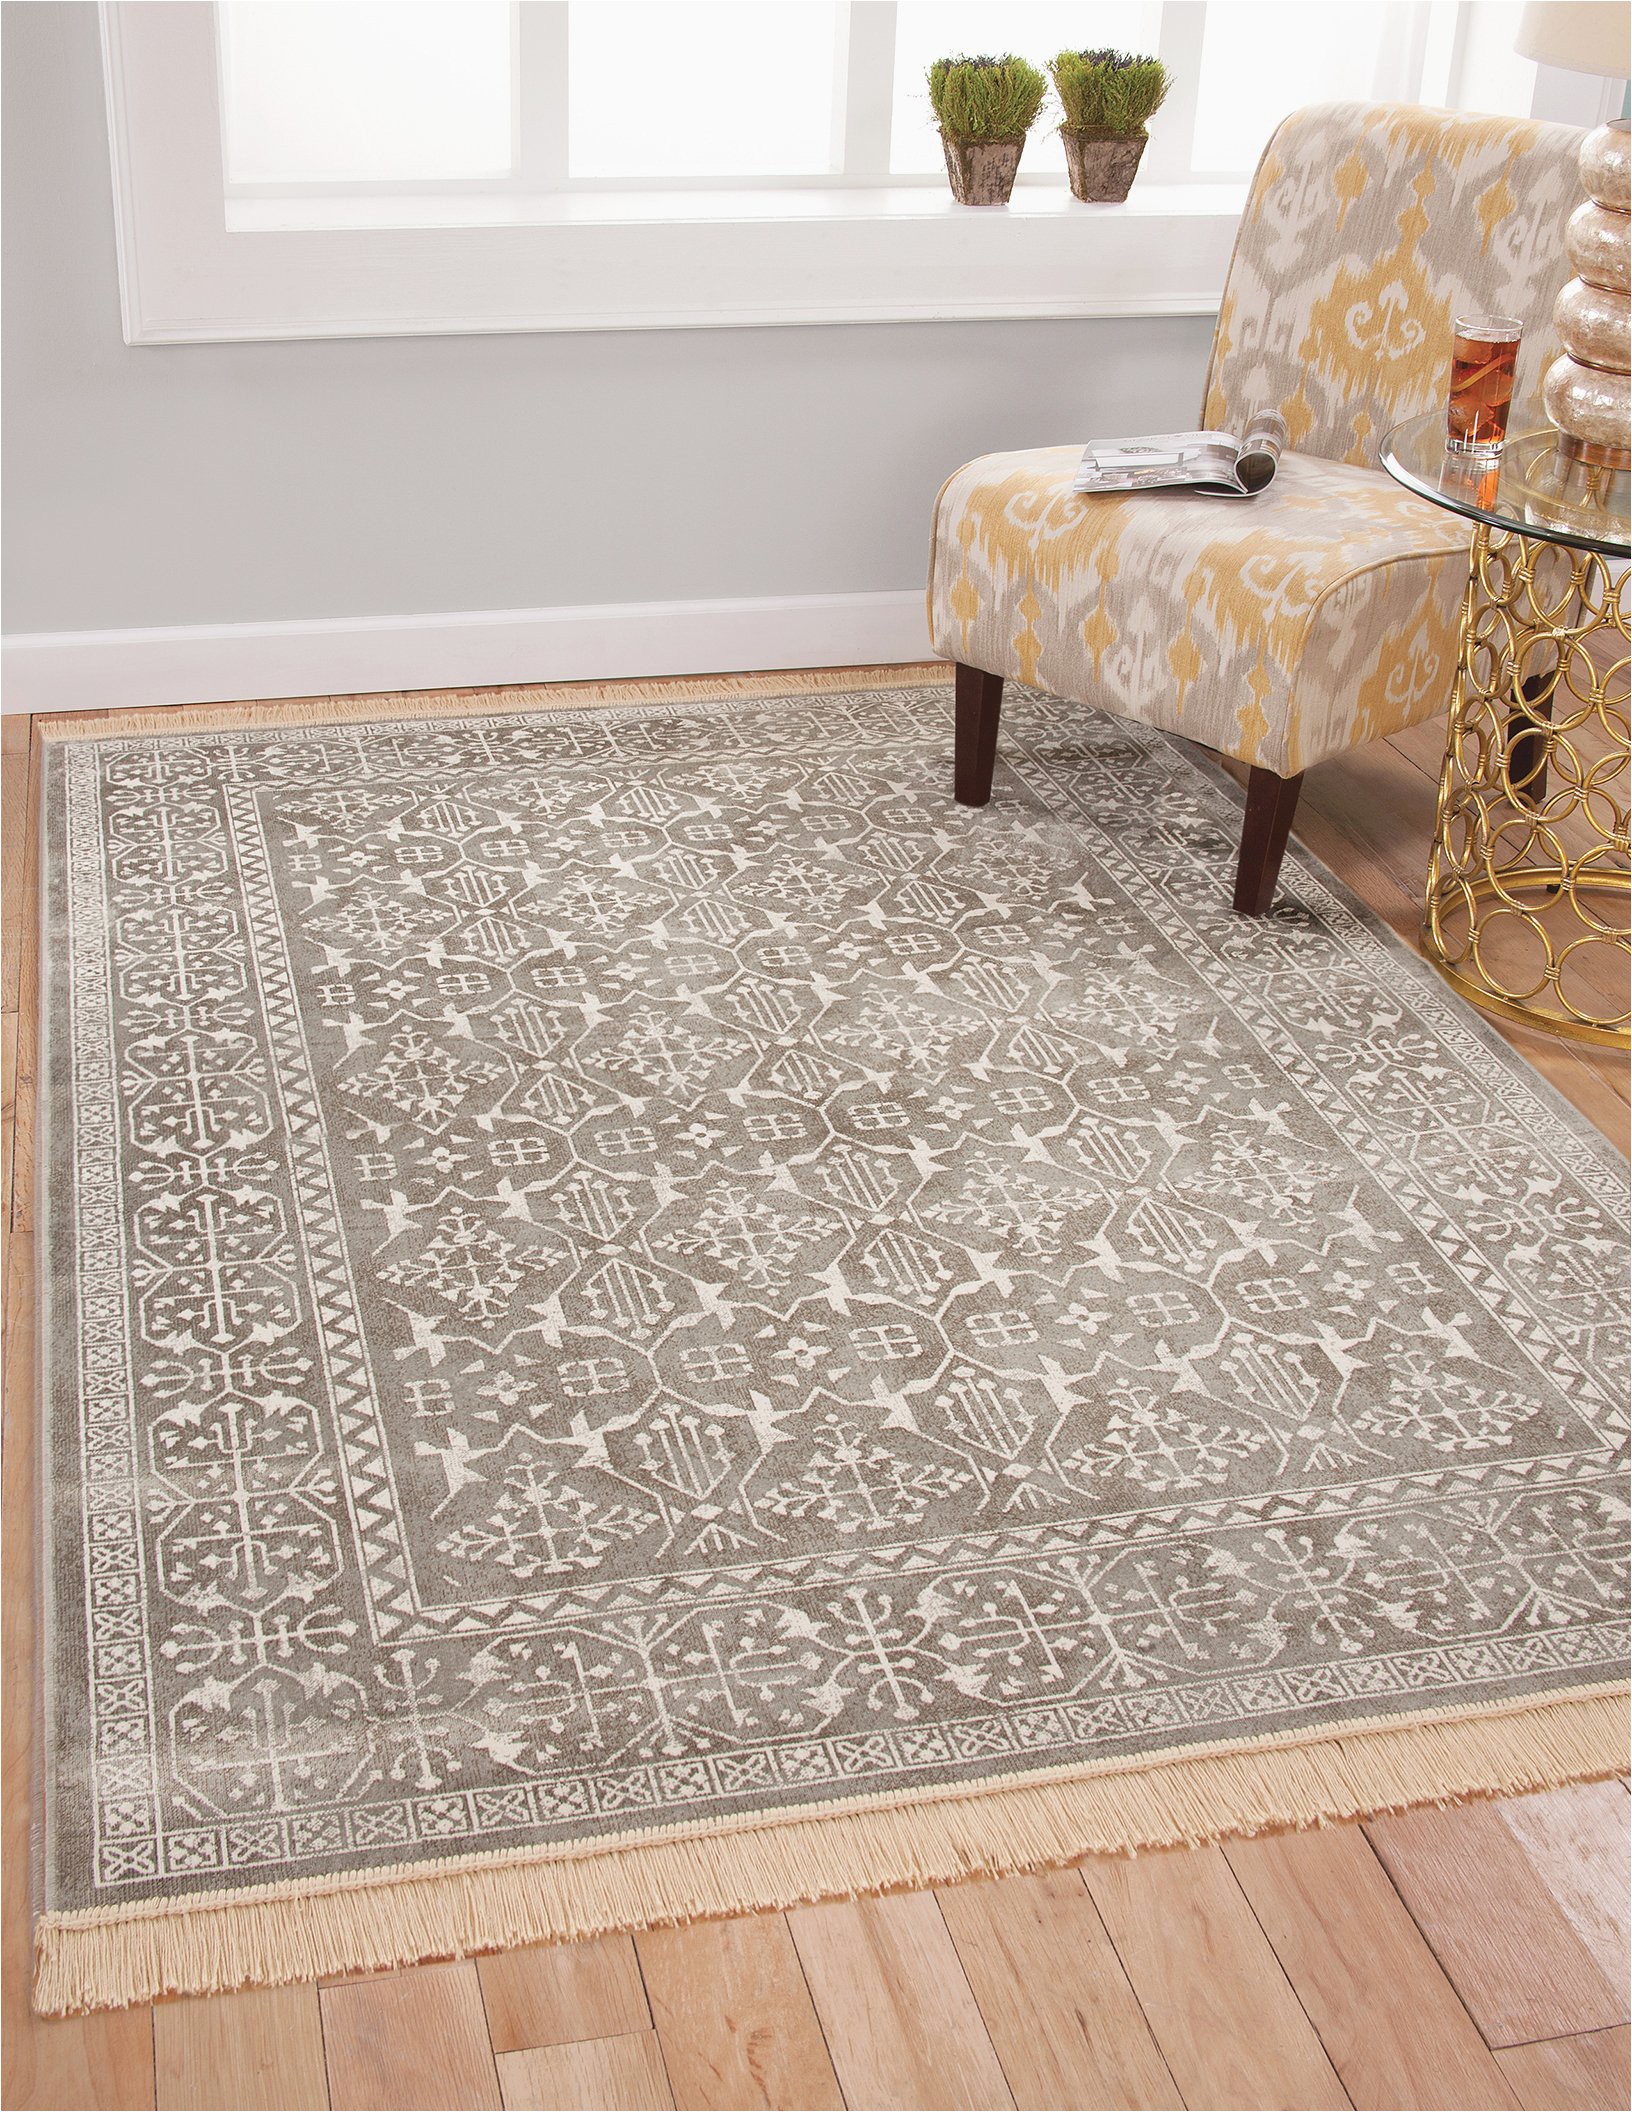 Large area Rug with Fringe Faded Silver Gray and White Worn Persian Style Fringe area Rug